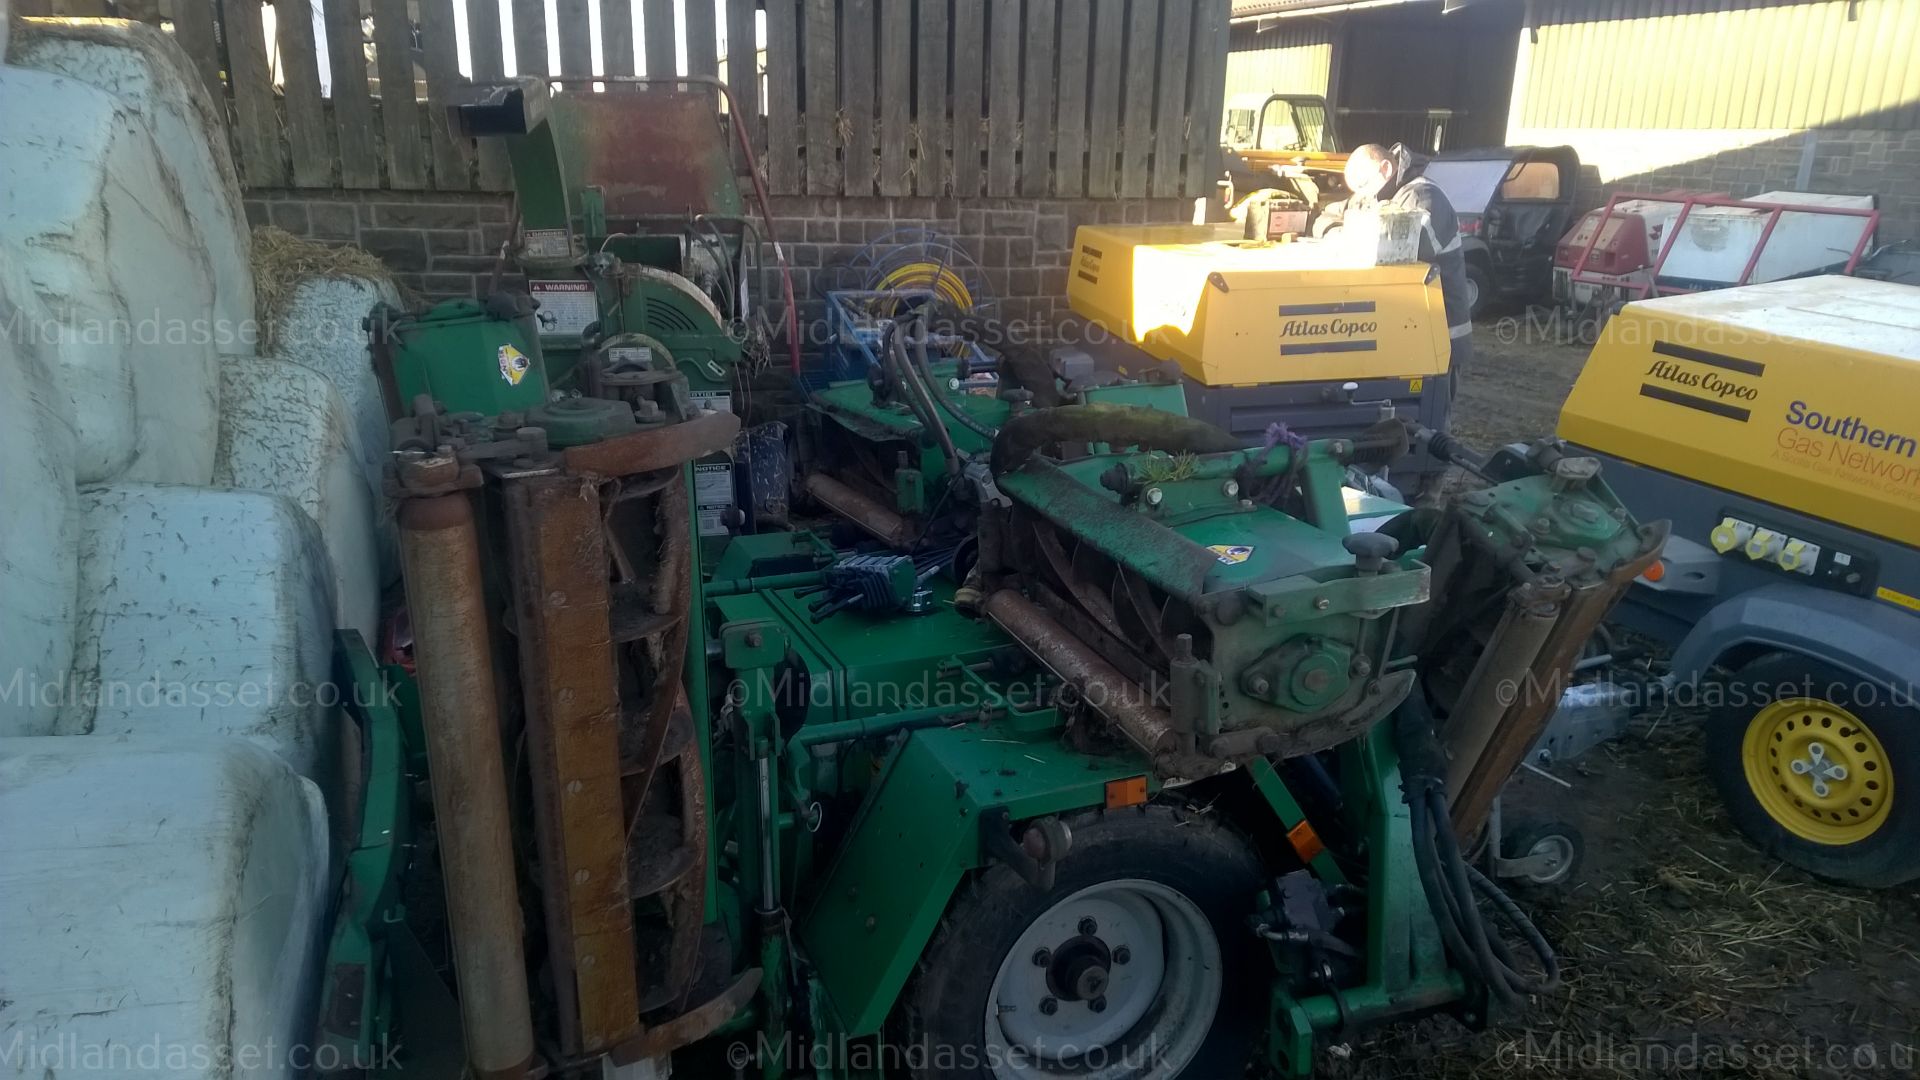 DS - RANSOMES TEXTRON TG 4650 GANG MOWER   EX COUNCIL GOOD WORKING ORDER COLLECTION FROM - Image 4 of 8